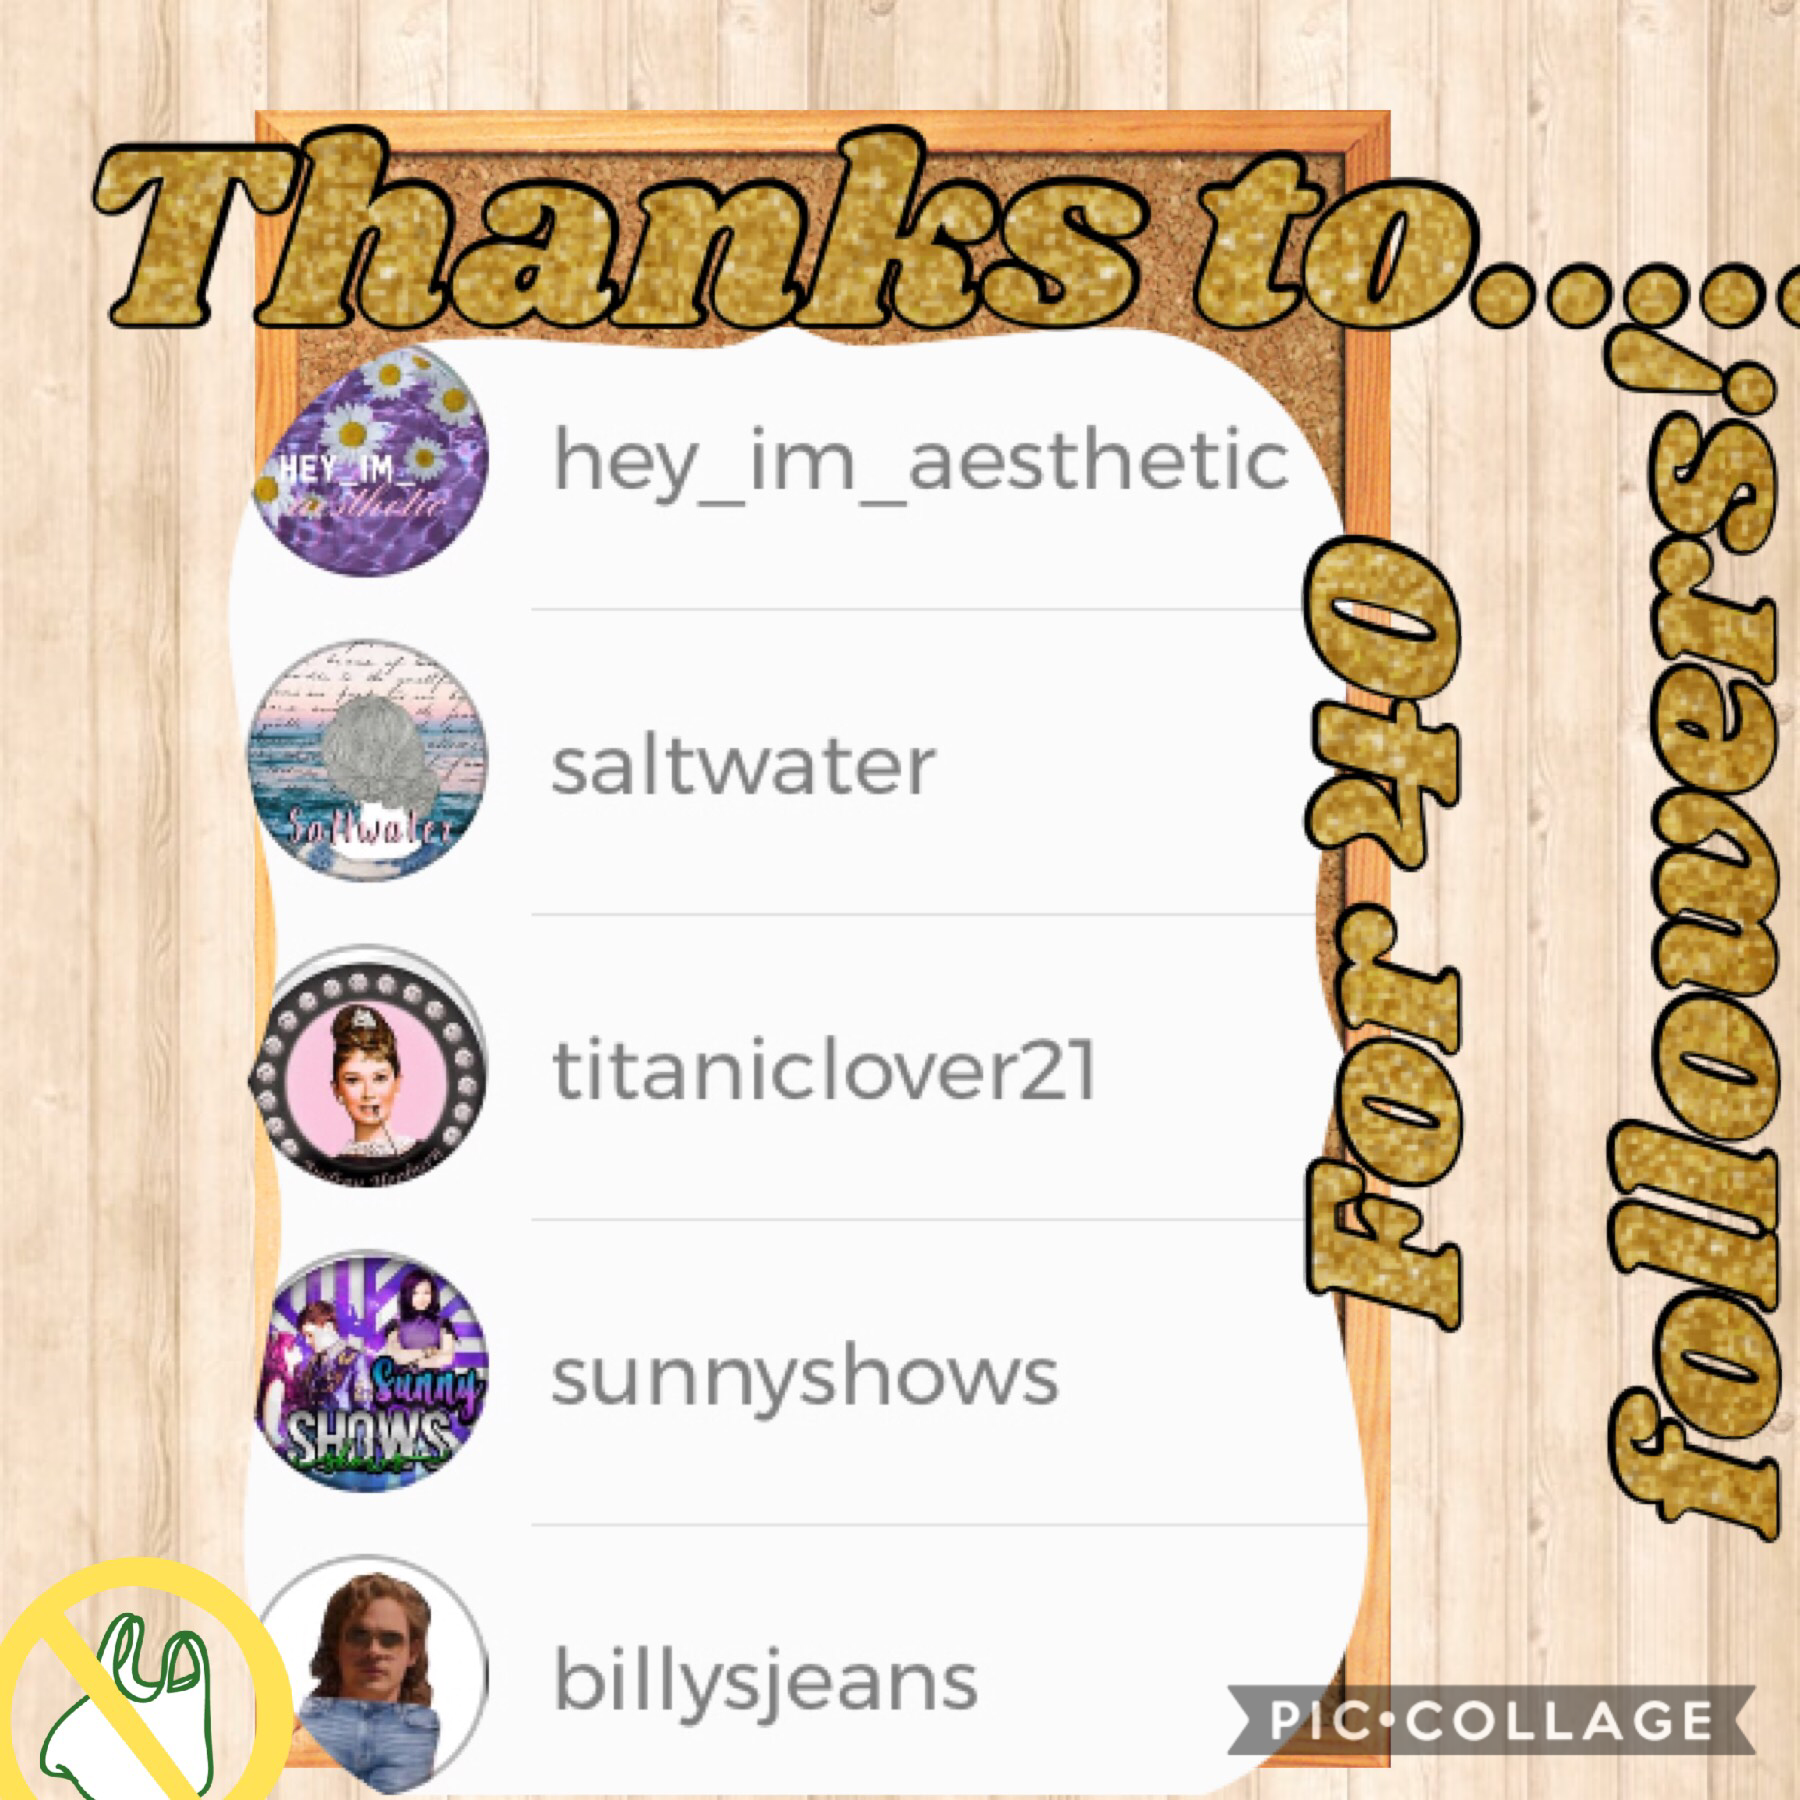 ❤️Tap❤️

Tysm to all who follow me! I am considering doing an environmental contest or a Father’s Day contest... comment ideas plz and u will get a shoutout and credit for the winning idea.